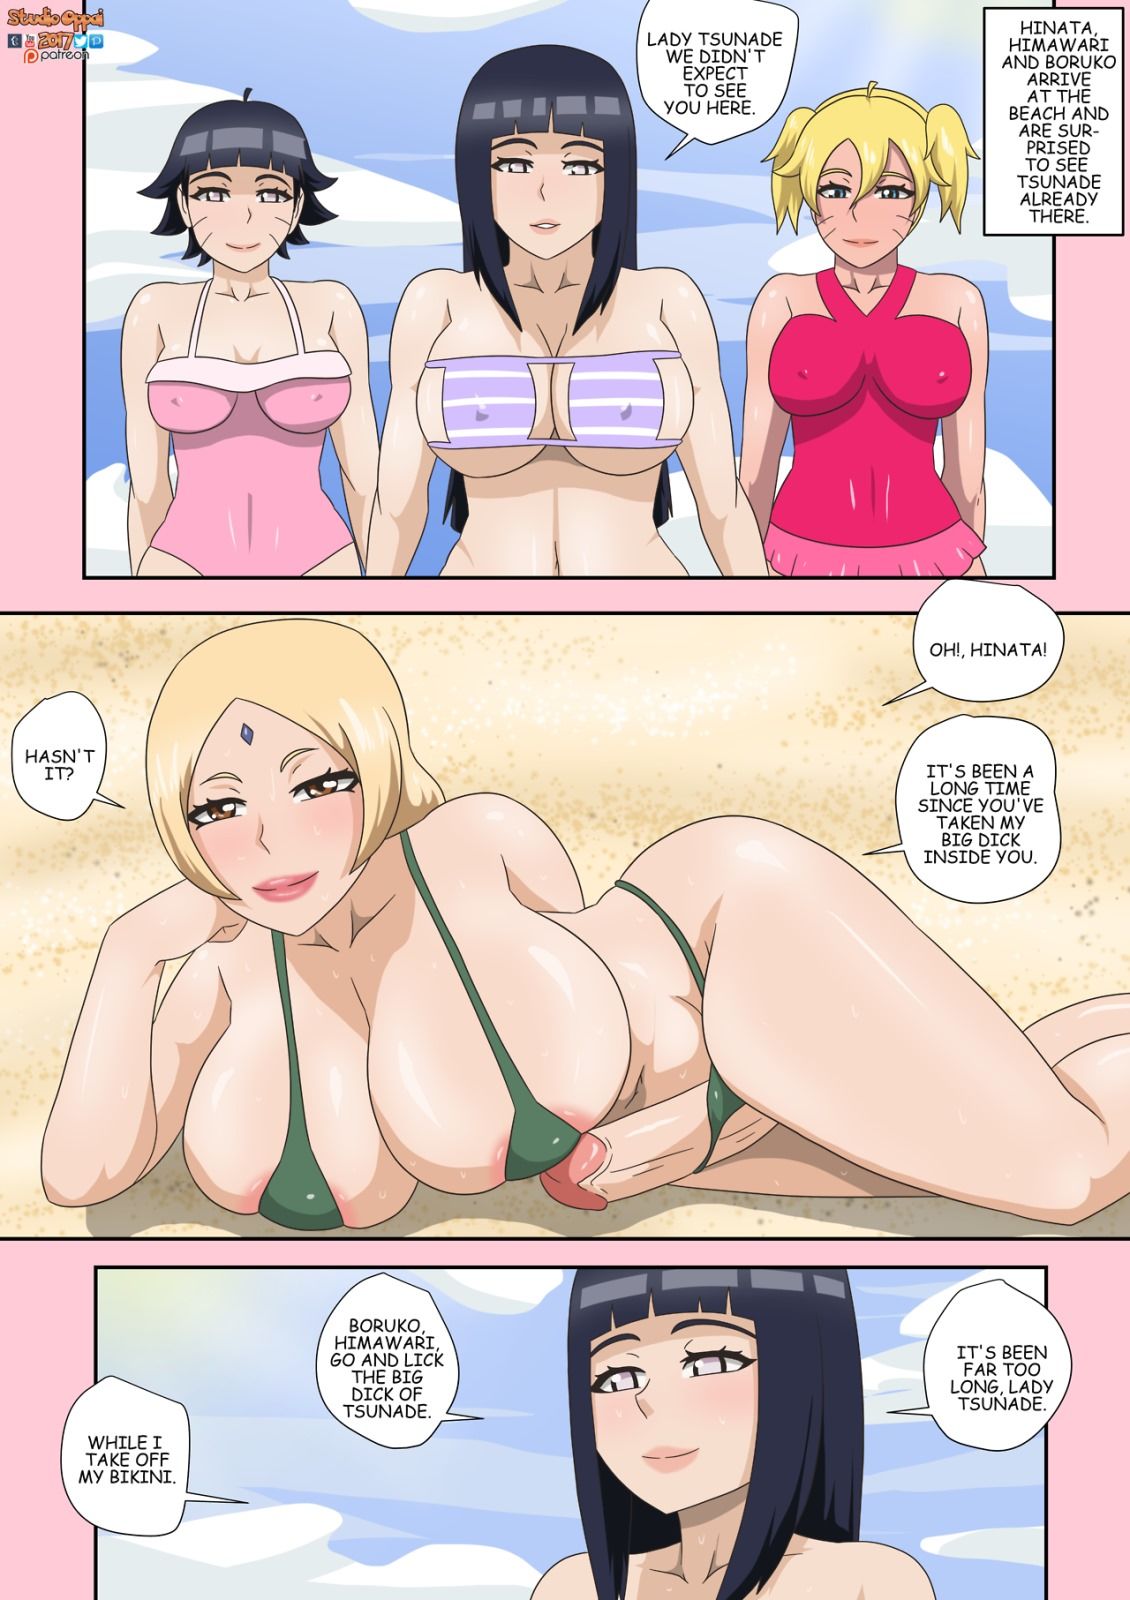 Studio Oppai-A Beautiful Day at the Beach page 1